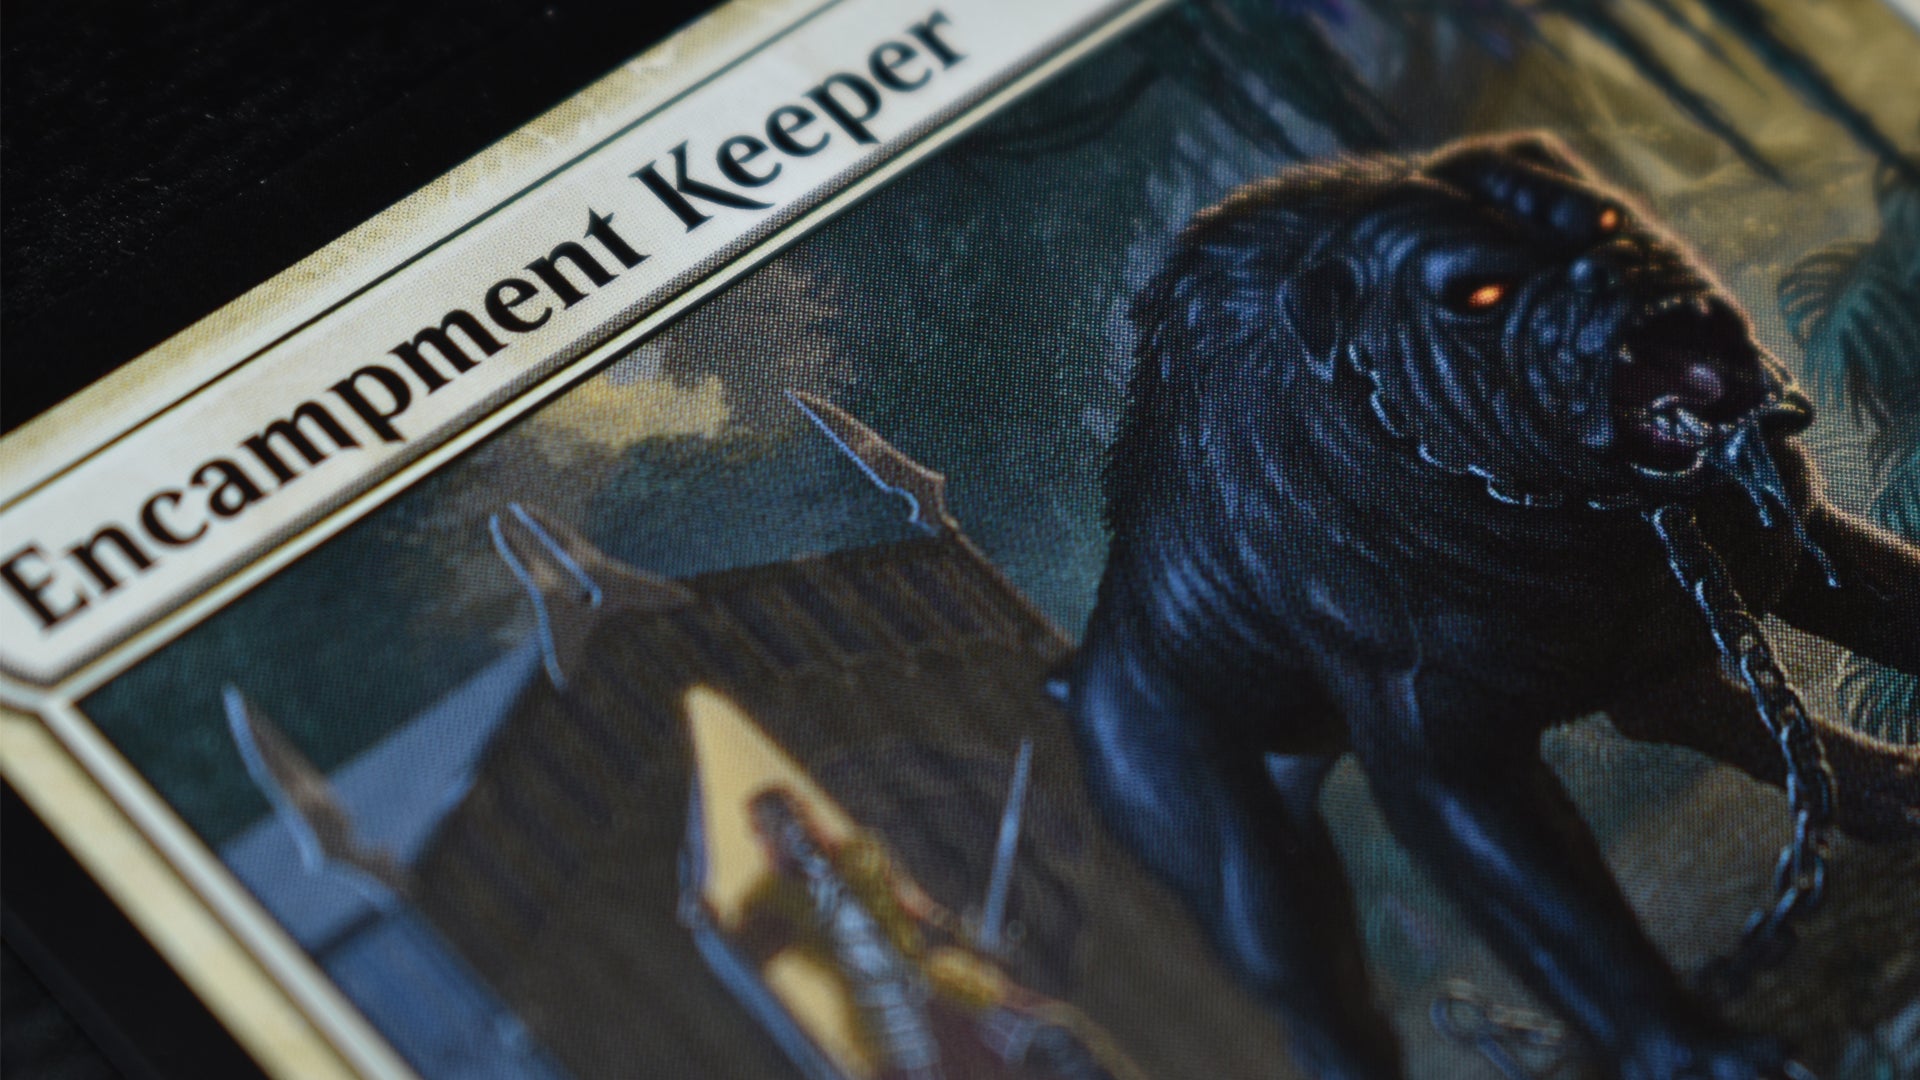 Magic: The Gathering trading card game Encampment Keeper creature card